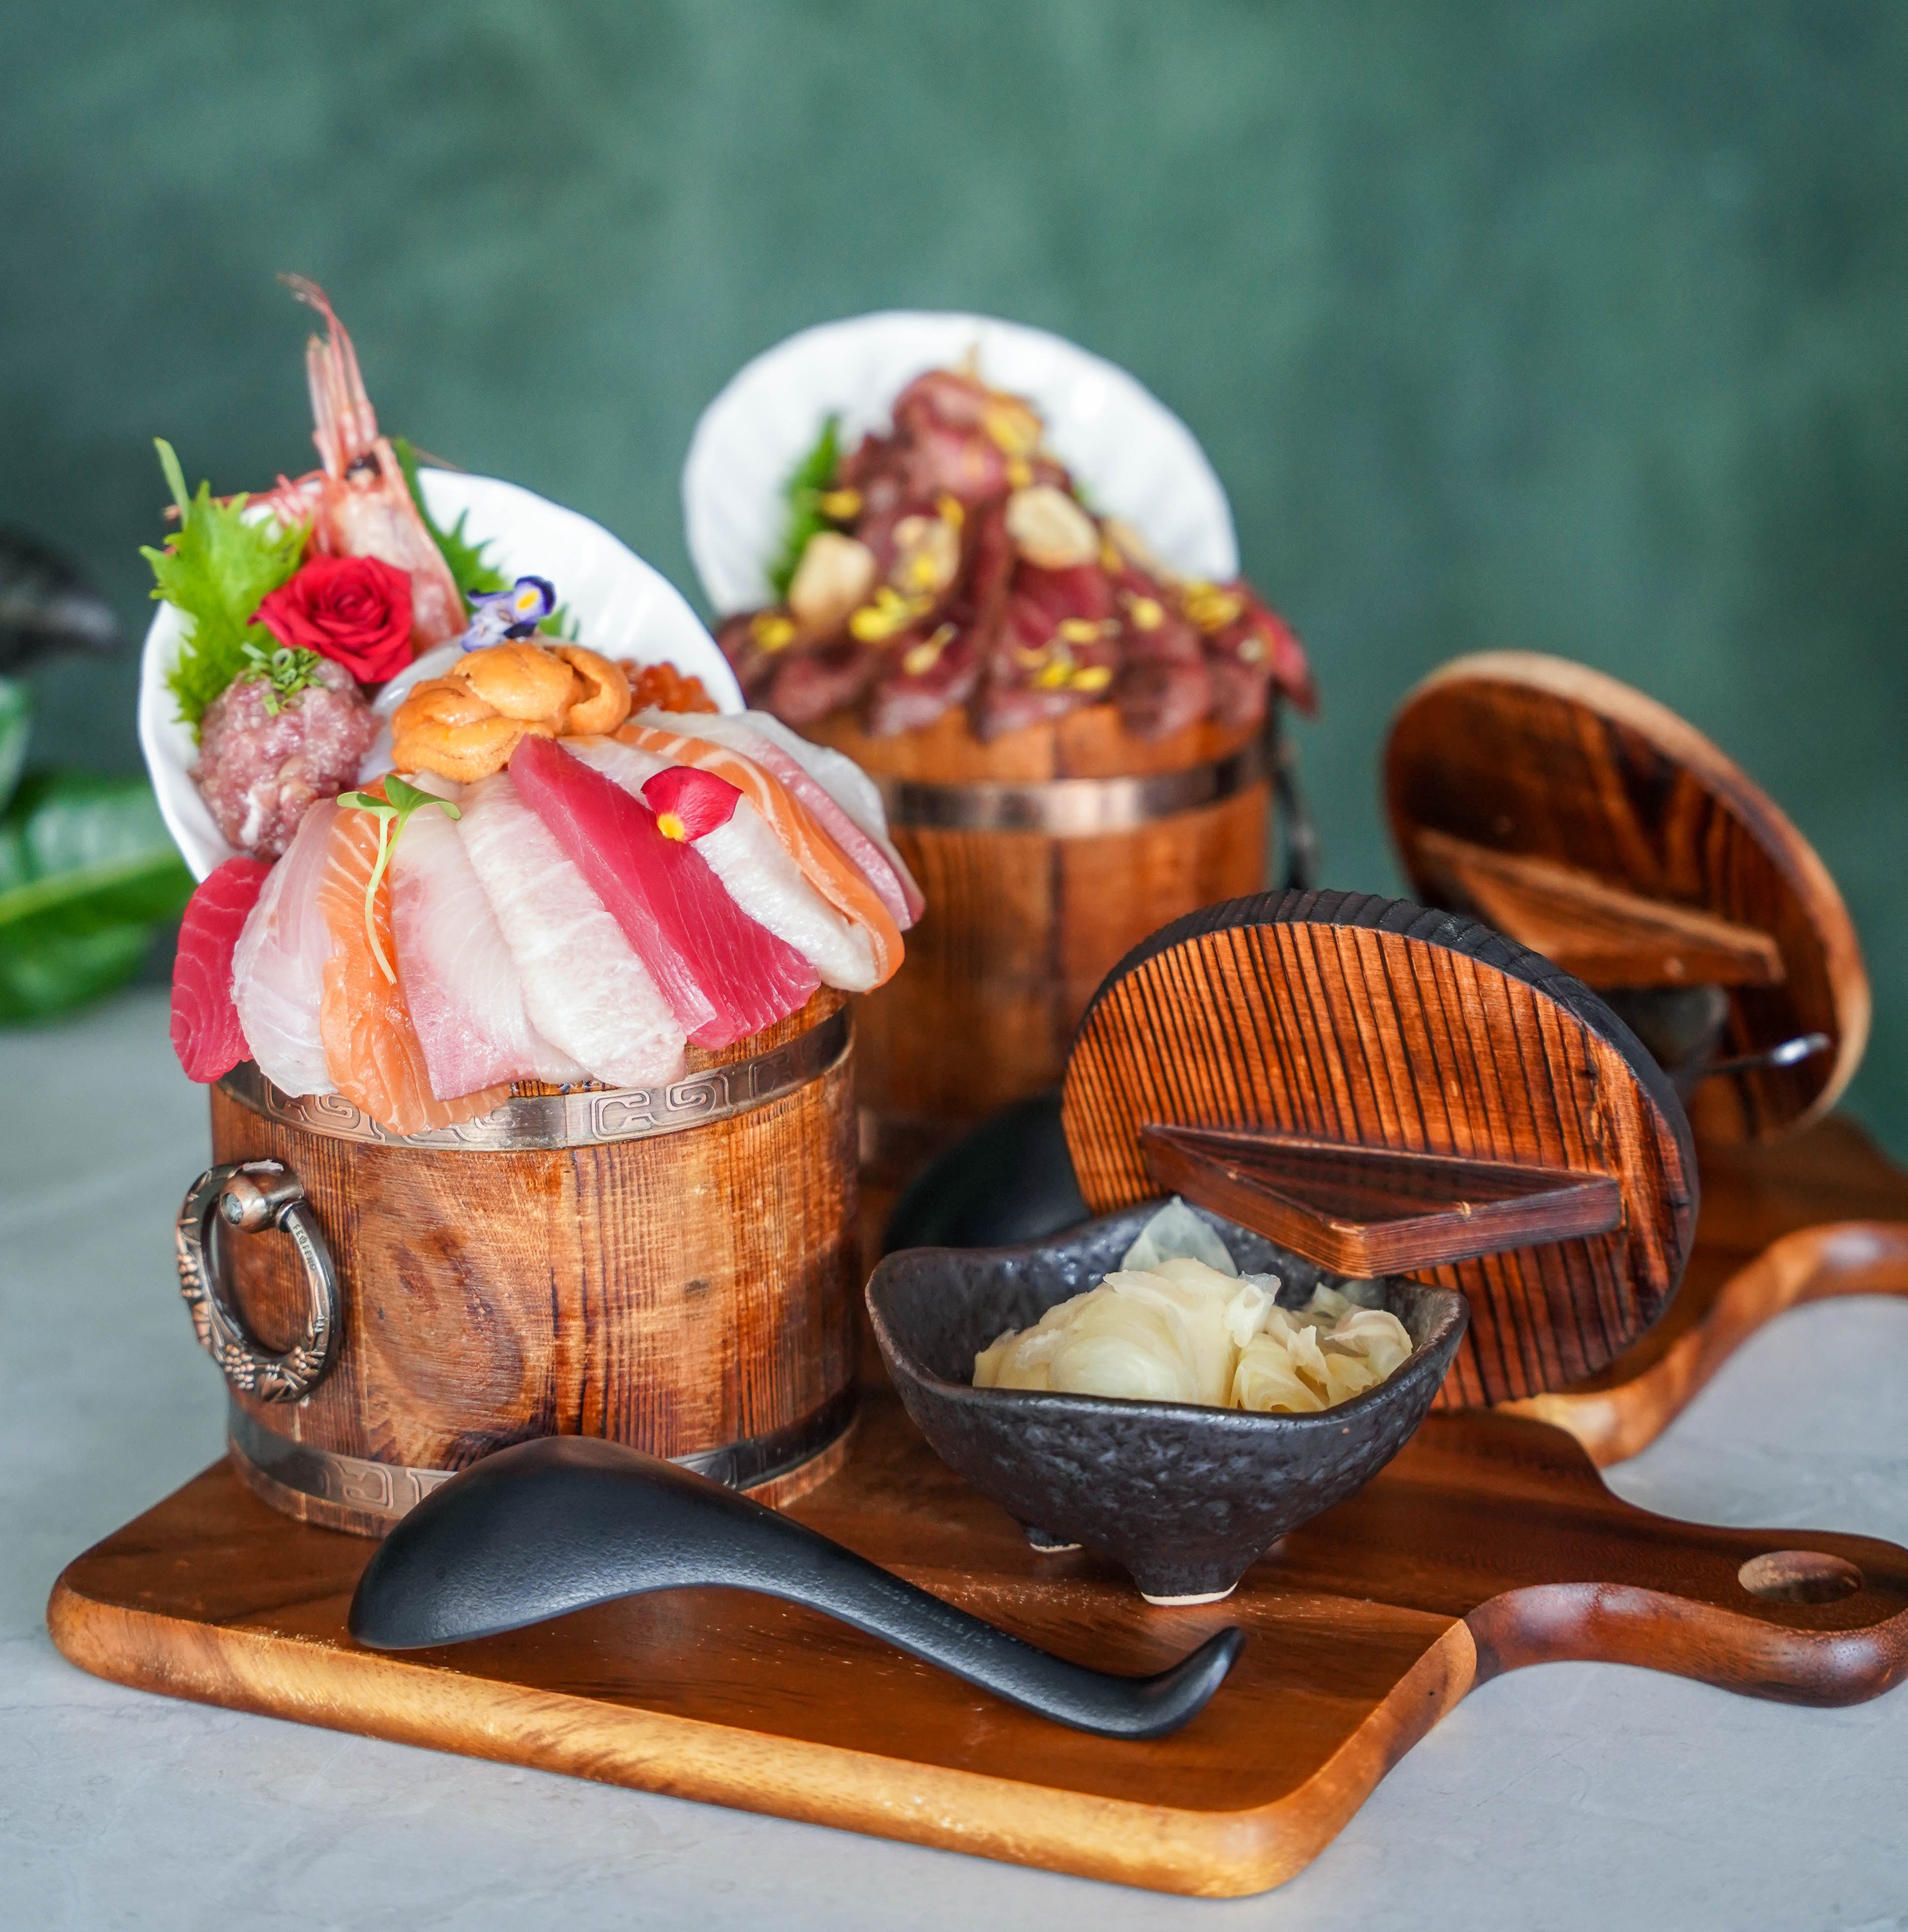 sushi mastro nikkei launches new barrelo don series with barrel-based seafood & beef rice bowls